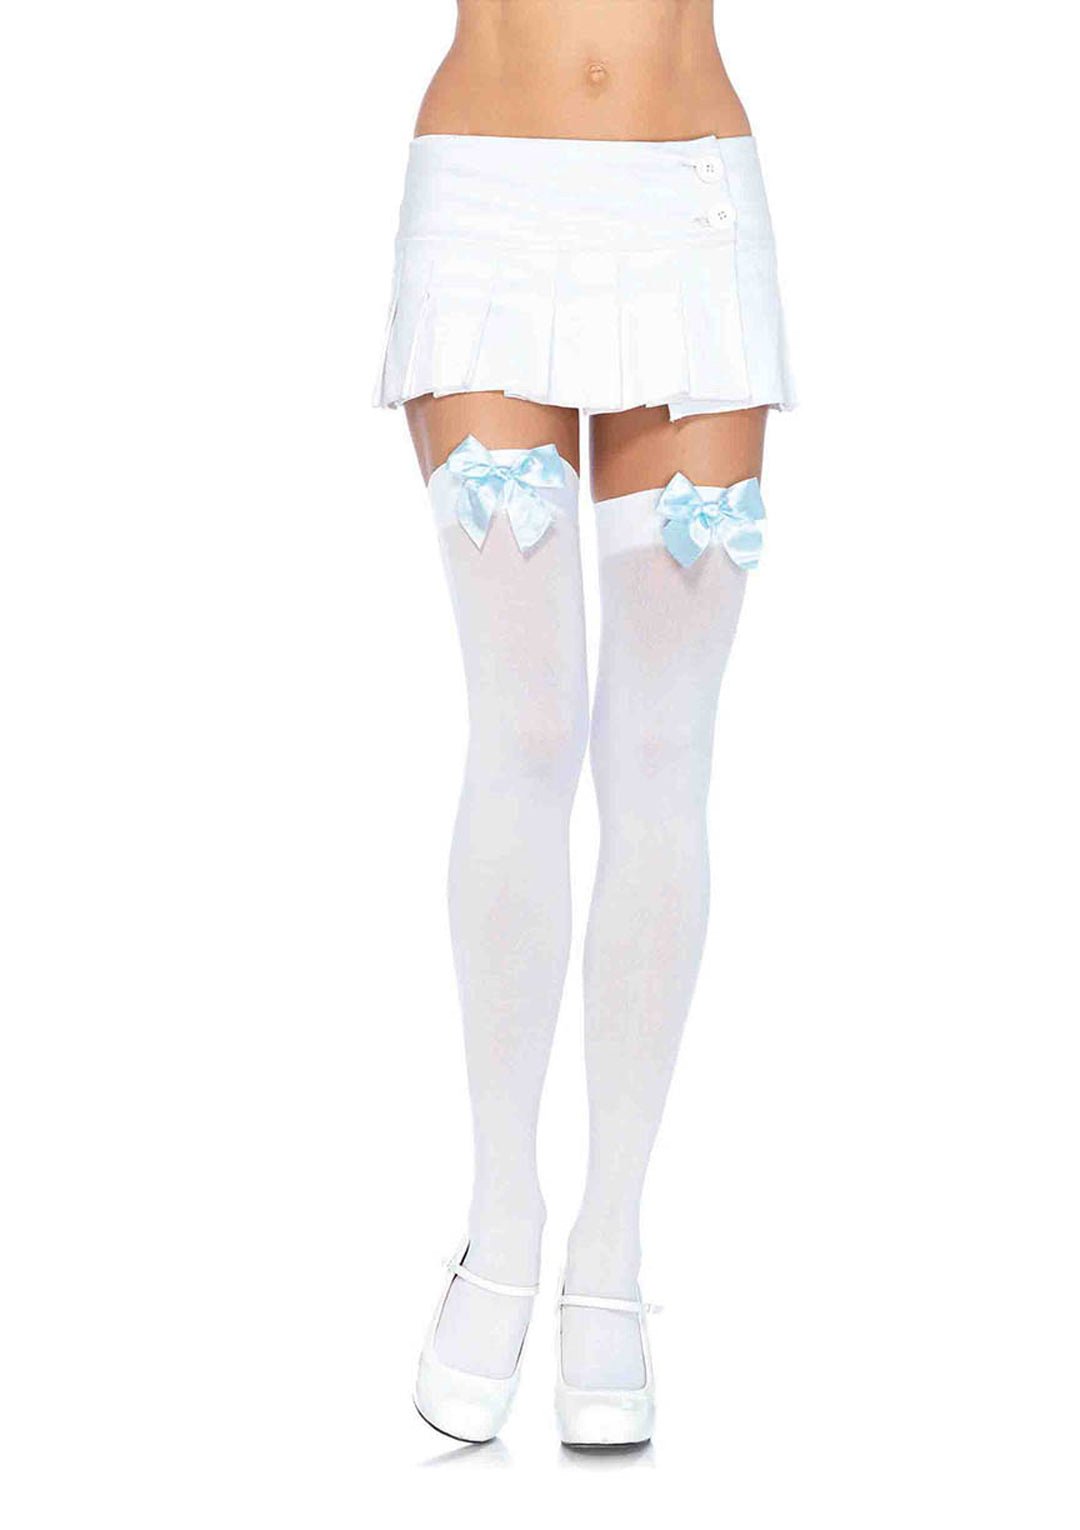 Thigh High Stockings with Bows - JJ's Party House